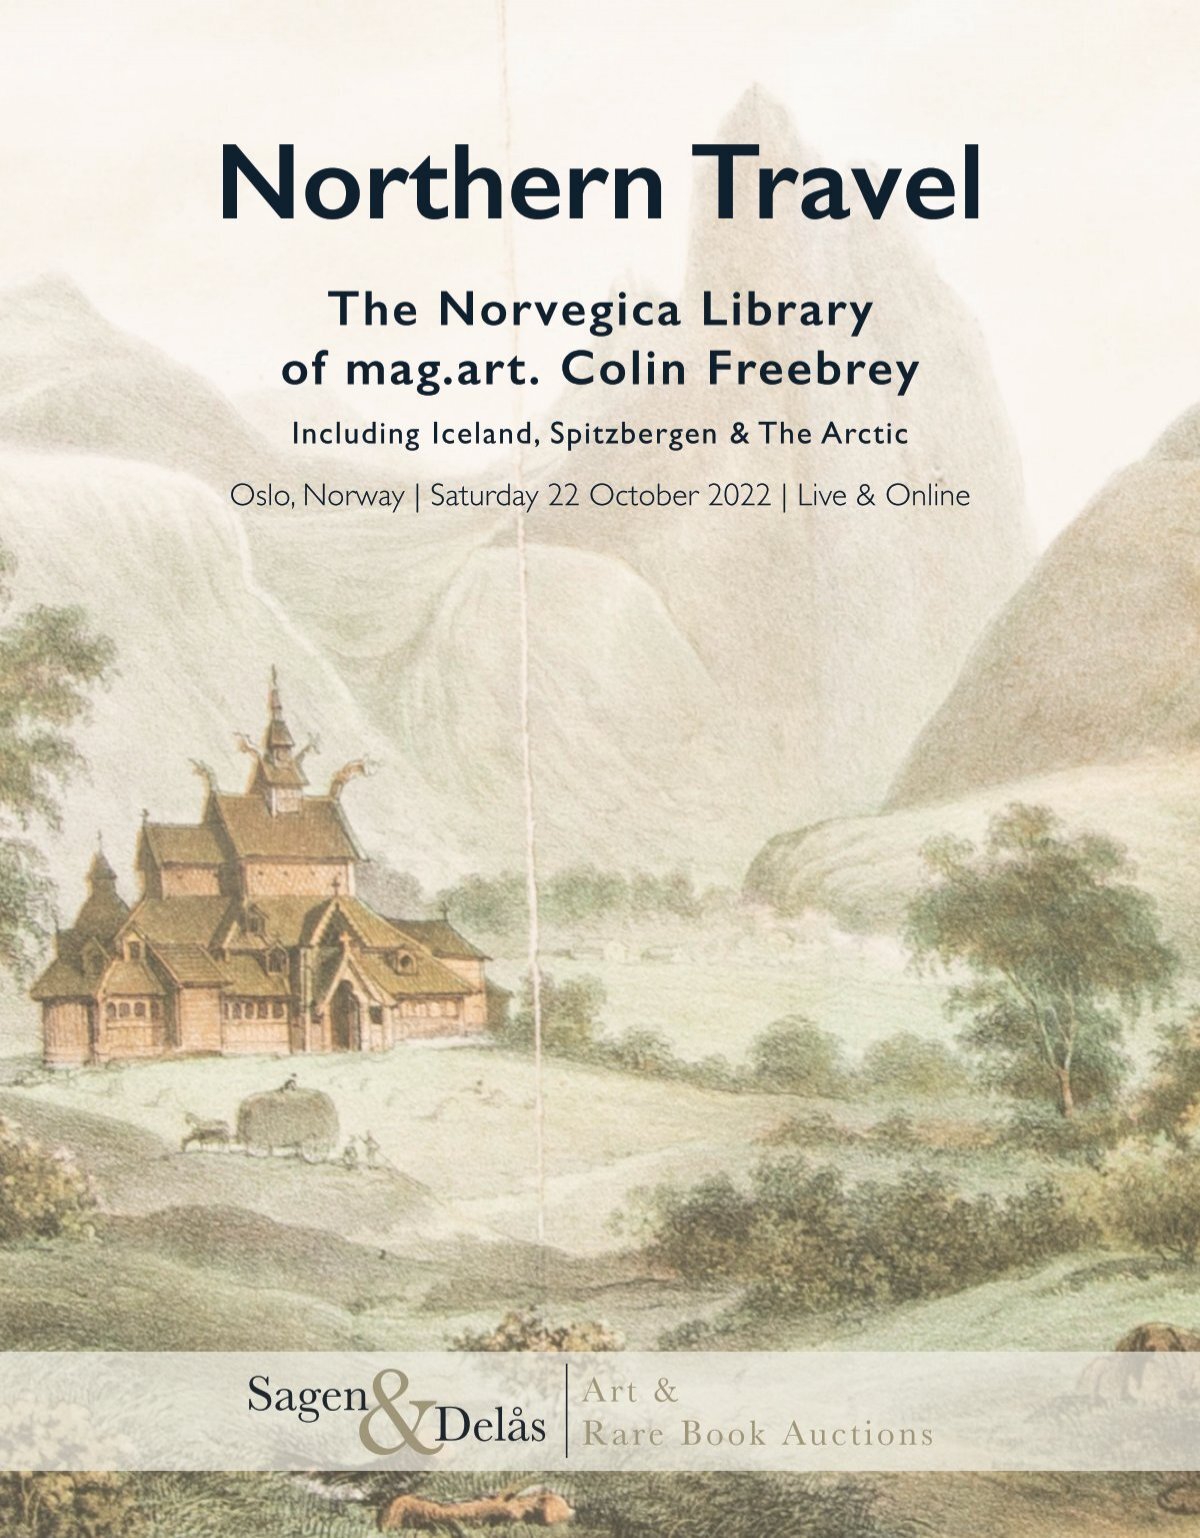 SD, Auctions - Northern Travel